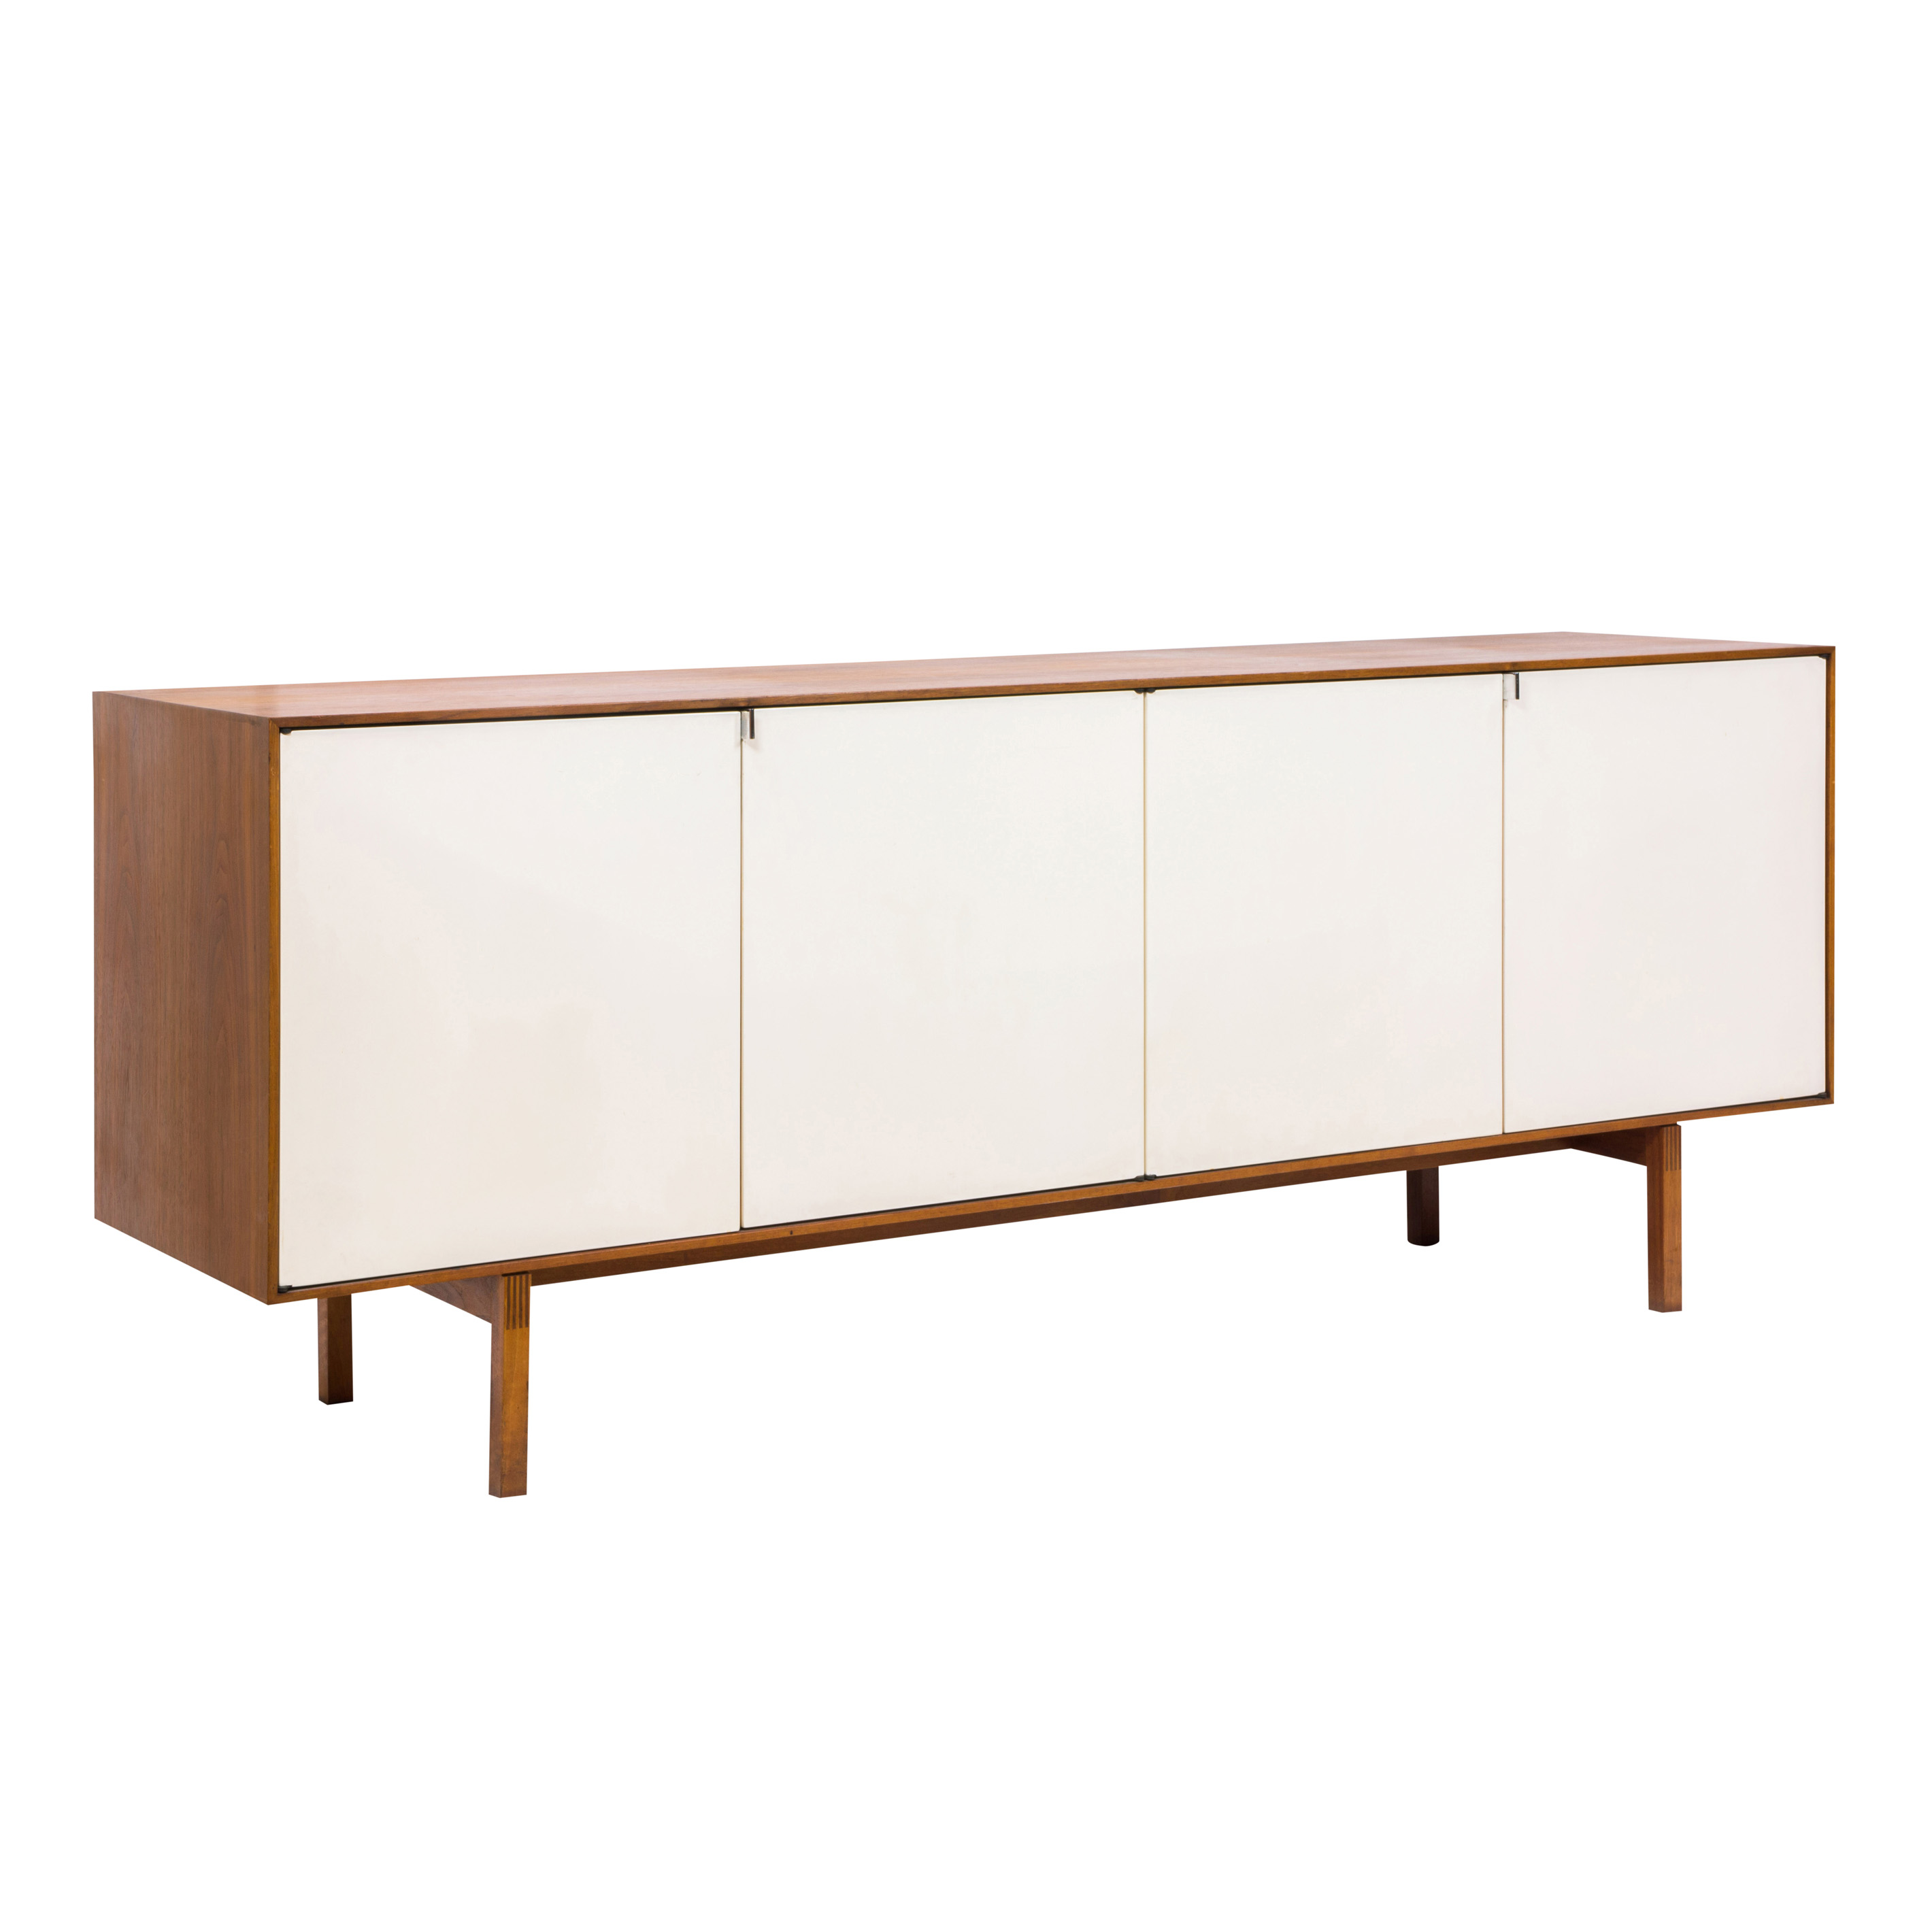 FLORENCE KNOLL CREDENZA Florence 3a2ec2